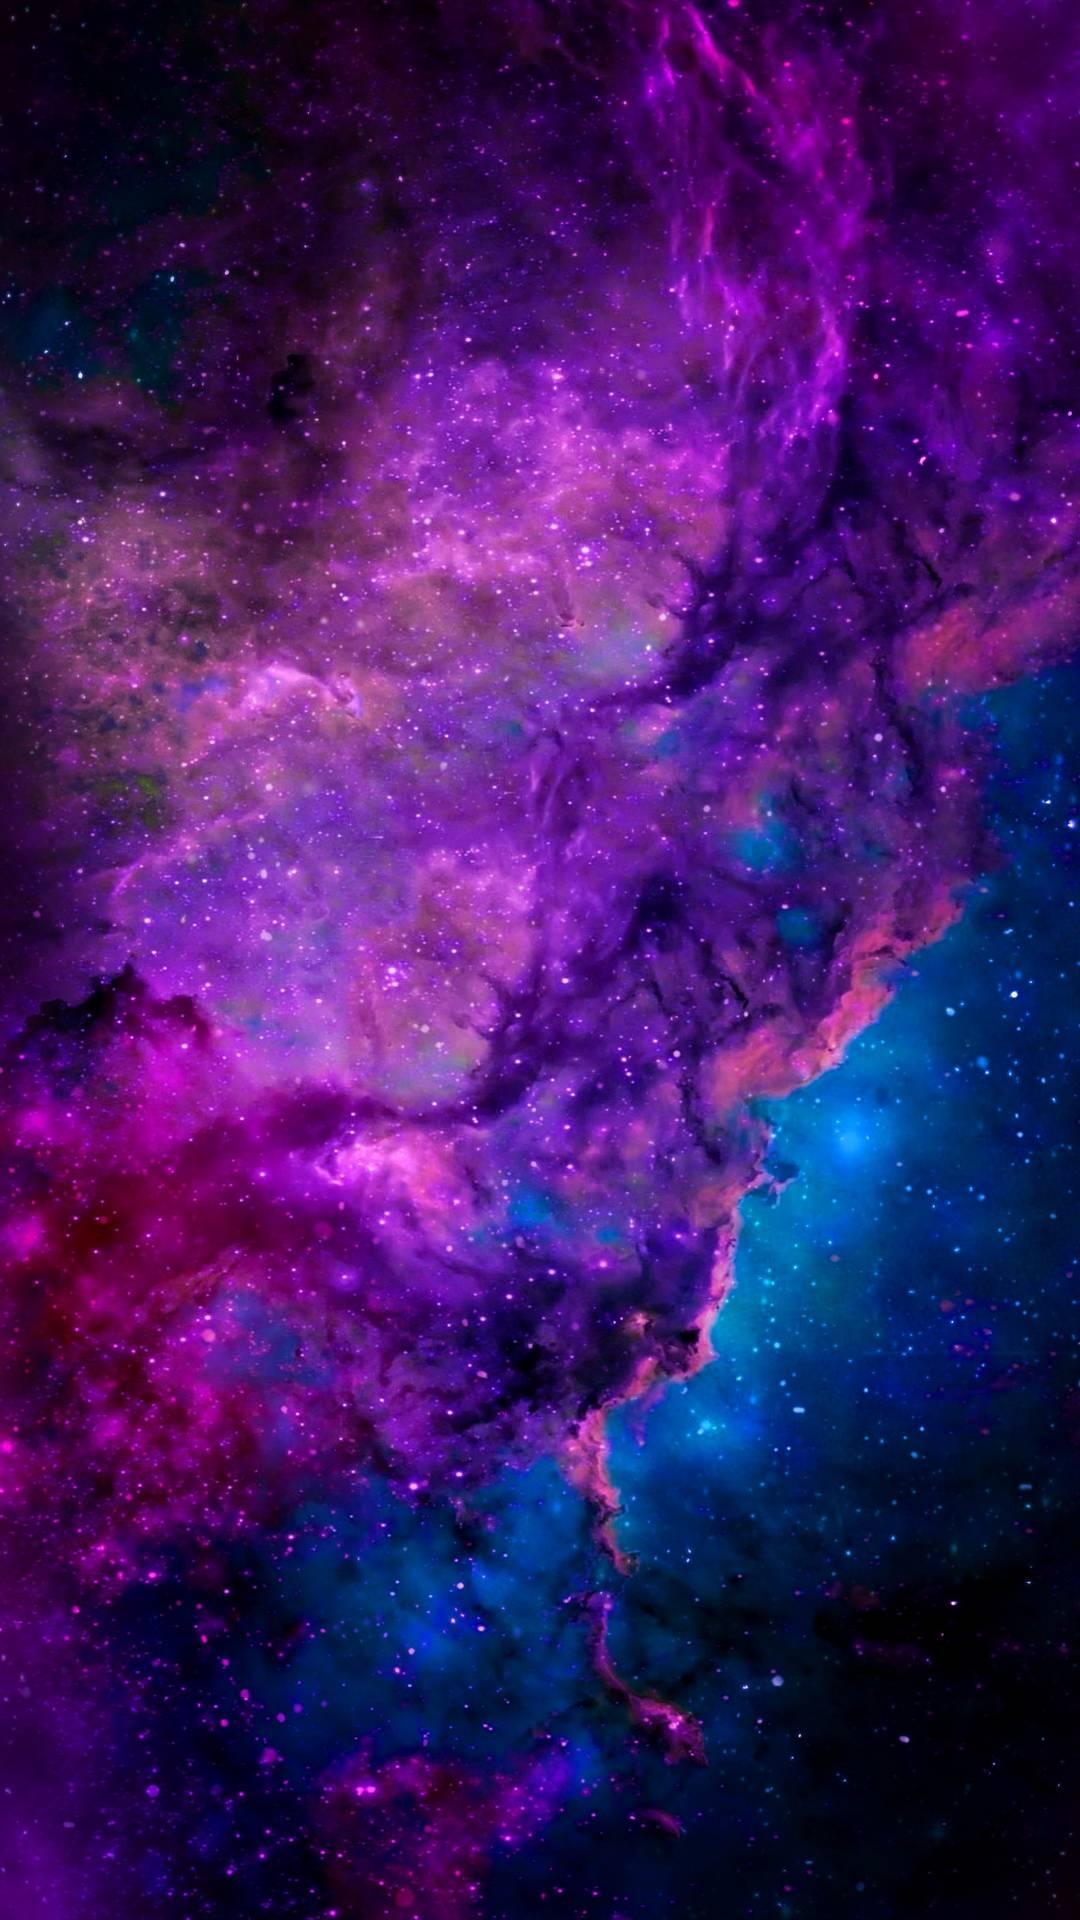 So I Was Looking For A New Phone Wallpaper With Subtle Bi Colours